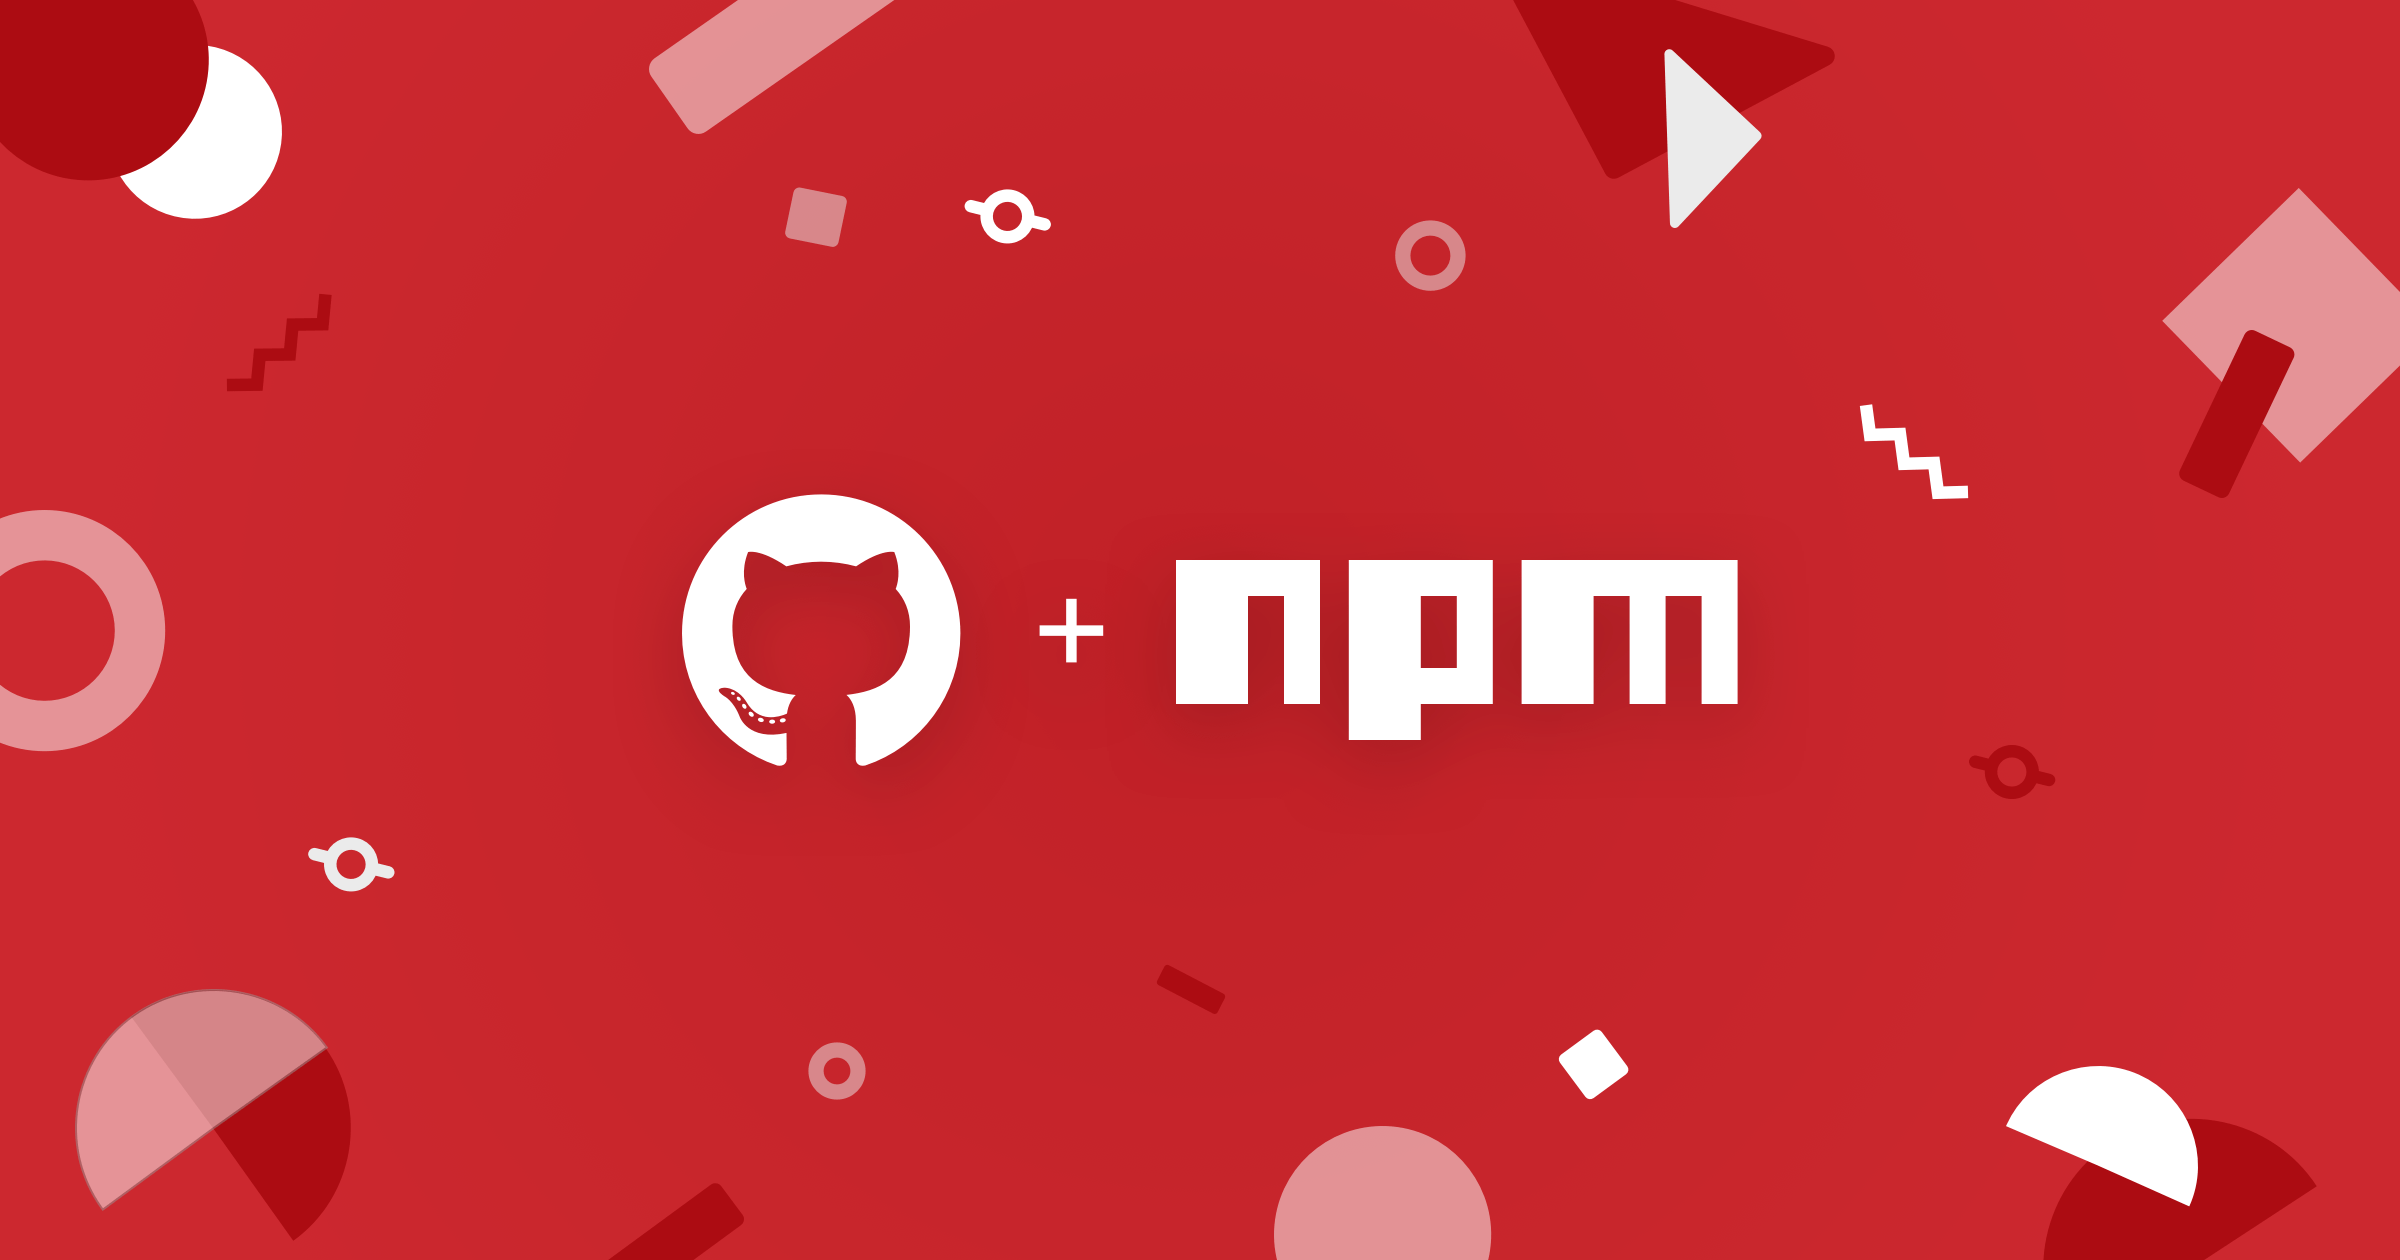 Microsoft has signed an agreement to acquire npm